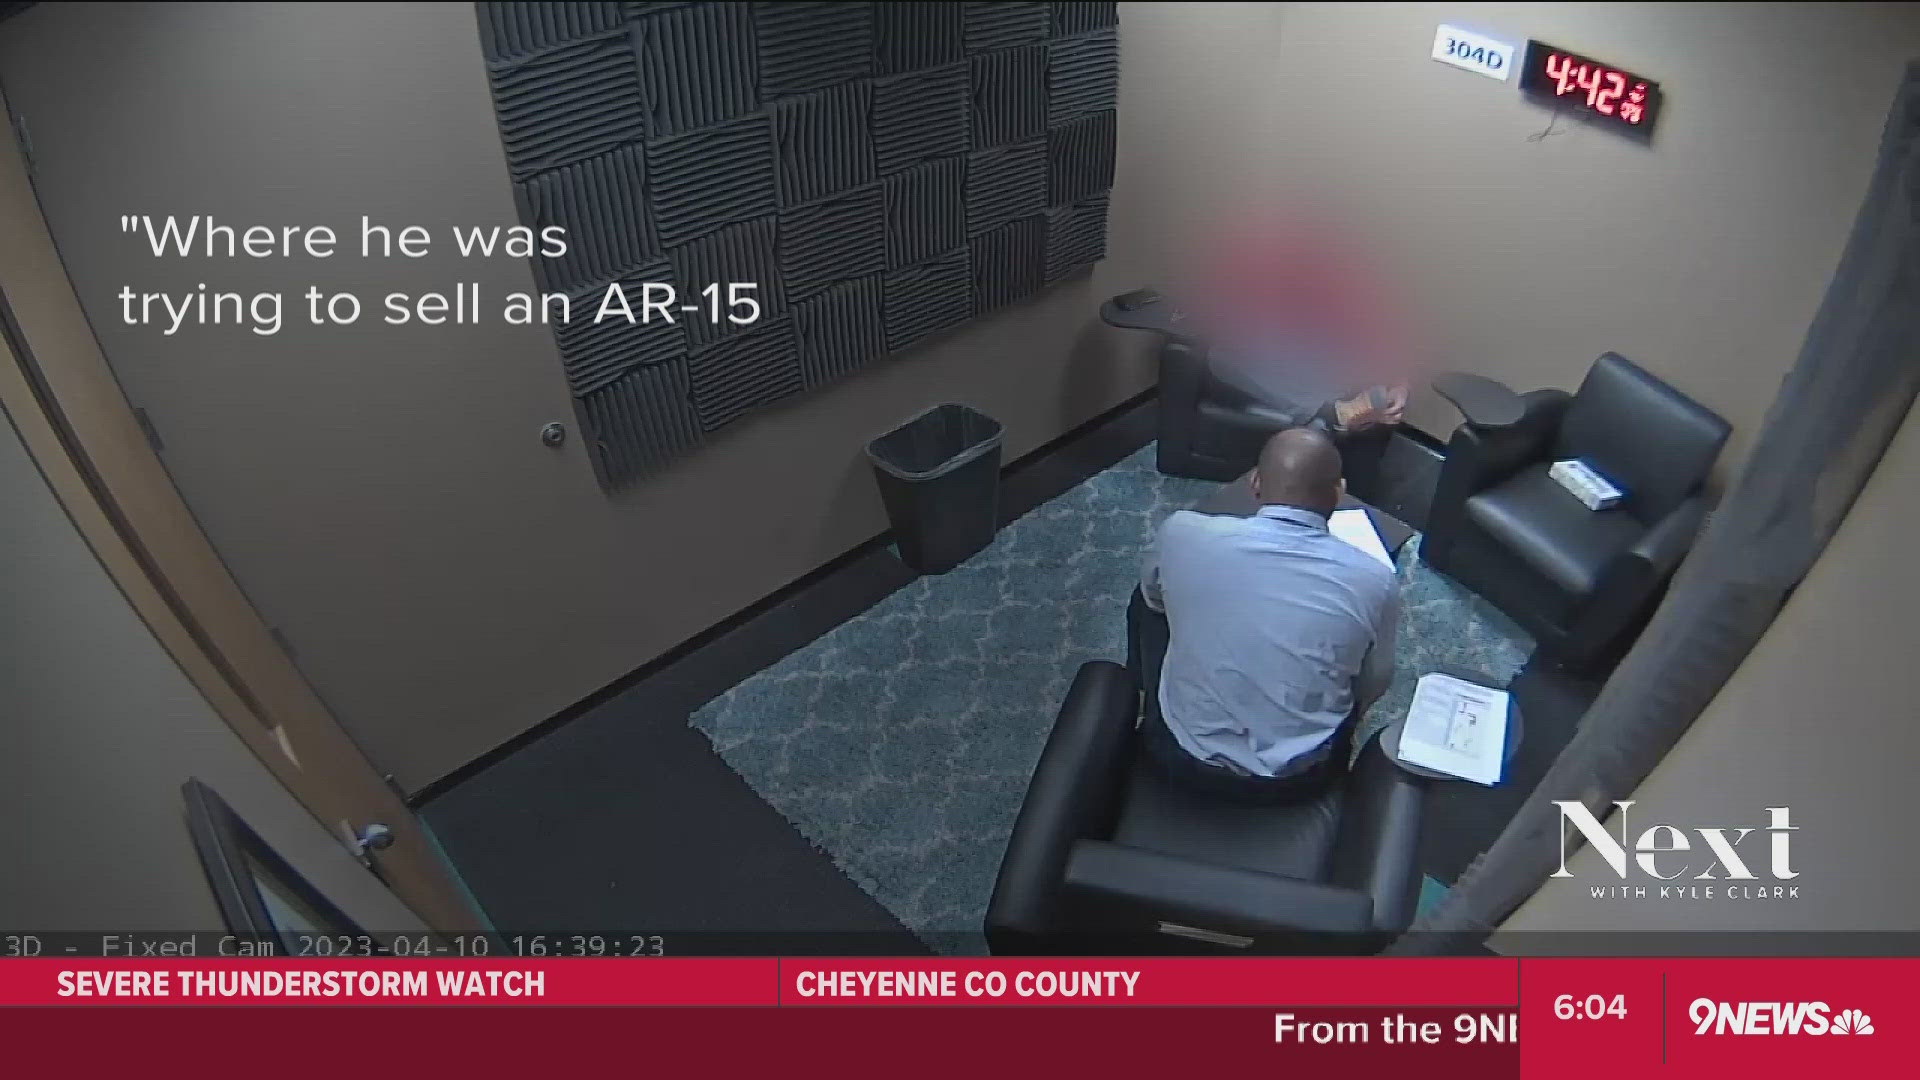 In an interview with police, the school's assistant principal said Denver Public Schools knew about the student's history with guns and still took him in.